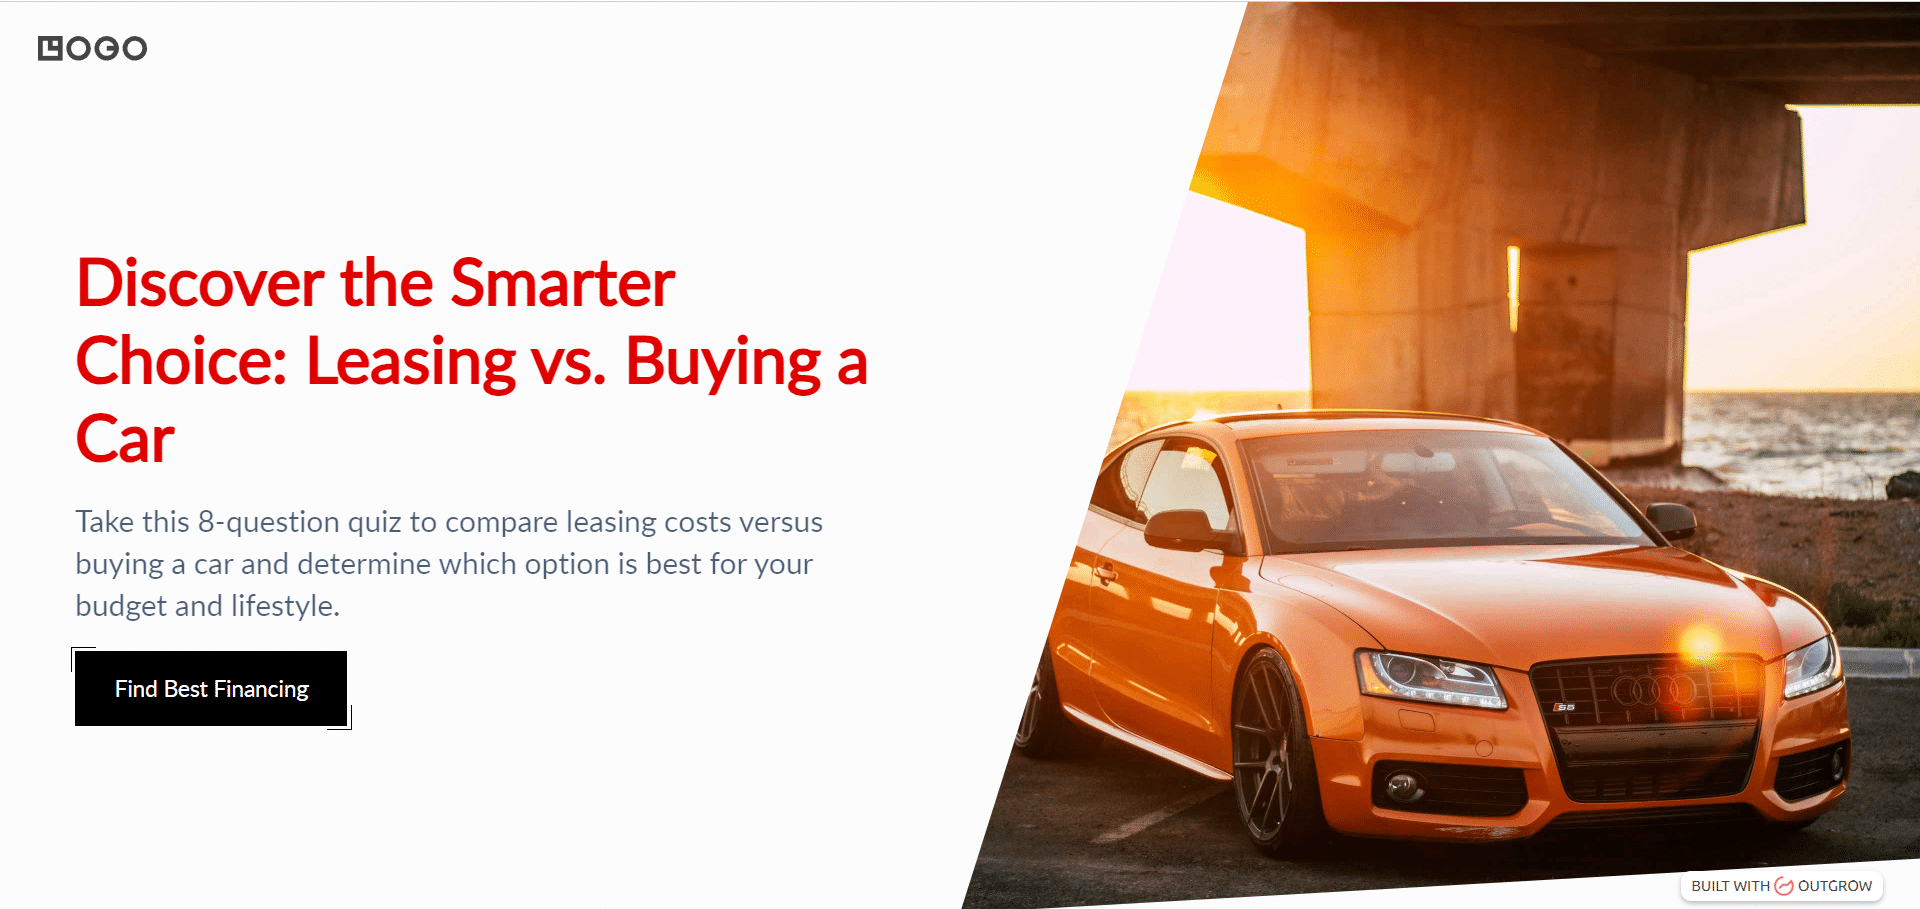 Discover the Smarter Choice Leasing vs. Buying a Car